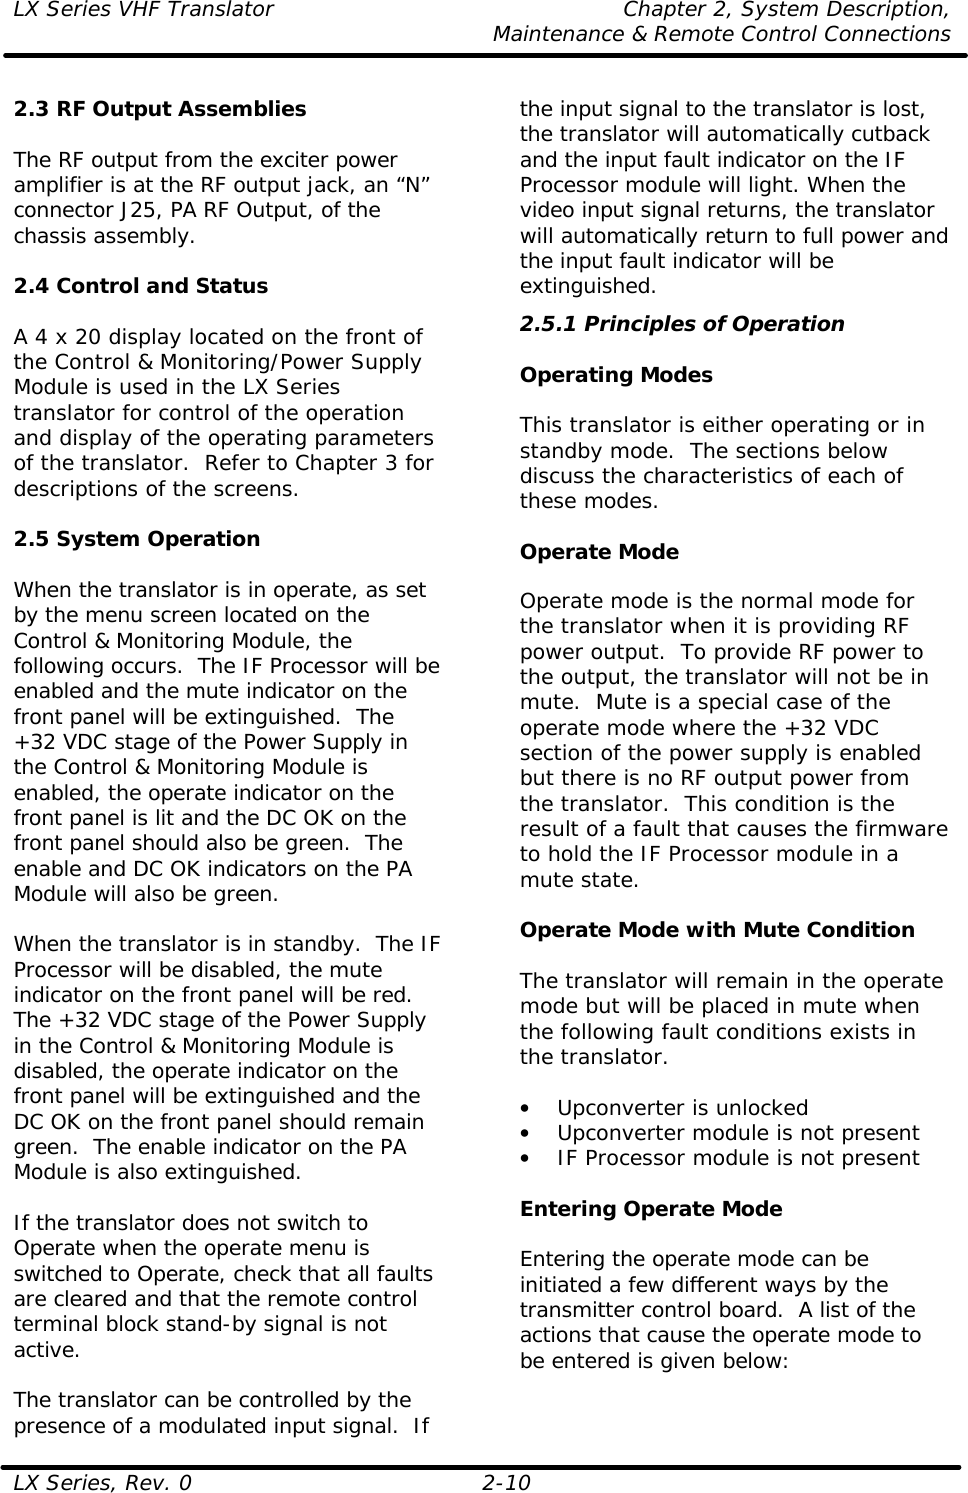 LX Series VHF Translator    Chapter 2, System Description,  Maintenance &amp; Remote Control Connections LX Series, Rev. 0 2-10  2.3 RF Output Assemblies  The RF output from the exciter power amplifier is at the RF output jack, an “N” connector J25, PA RF Output, of the chassis assembly.    2.4 Control and Status  A 4 x 20 display located on the front of the Control &amp; Monitoring/Power Supply Module is used in the LX Series translator for control of the operation and display of the operating parameters of the translator.  Refer to Chapter 3 for descriptions of the screens.  2.5 System Operation  When the translator is in operate, as set by the menu screen located on the Control &amp; Monitoring Module, the following occurs.  The IF Processor will be enabled and the mute indicator on the front panel will be extinguished.  The +32 VDC stage of the Power Supply in the Control &amp; Monitoring Module is enabled, the operate indicator on the front panel is lit and the DC OK on the front panel should also be green.  The enable and DC OK indicators on the PA Module will also be green.  When the translator is in standby.  The IF Processor will be disabled, the mute indicator on the front panel will be red.  The +32 VDC stage of the Power Supply in the Control &amp; Monitoring Module is disabled, the operate indicator on the front panel will be extinguished and the DC OK on the front panel should remain green.  The enable indicator on the PA Module is also extinguished.  If the translator does not switch to Operate when the operate menu is switched to Operate, check that all faults are cleared and that the remote control terminal block stand-by signal is not active.   The translator can be controlled by the presence of a modulated input signal.  If the input signal to the translator is lost, the translator will automatically cutback and the input fault indicator on the IF Processor module will light. When the video input signal returns, the translator will automatically return to full power and the input fault indicator will be extinguished. 2.5.1 Principles of Operation  Operating Modes  This translator is either operating or in standby mode.  The sections below discuss the characteristics of each of these modes.  Operate Mode  Operate mode is the normal mode for the translator when it is providing RF power output.  To provide RF power to the output, the translator will not be in mute.  Mute is a special case of the operate mode where the +32 VDC section of the power supply is enabled but there is no RF output power from the translator.  This condition is the result of a fault that causes the firmware to hold the IF Processor module in a mute state.   Operate Mode with Mute Condition  The translator will remain in the operate mode but will be placed in mute when the following fault conditions exists in the translator.  • Upconverter is unlocked • Upconverter module is not present • IF Processor module is not present  Entering Operate Mode  Entering the operate mode can be initiated a few different ways by the transmitter control board.  A list of the actions that cause the operate mode to be entered is given below:  